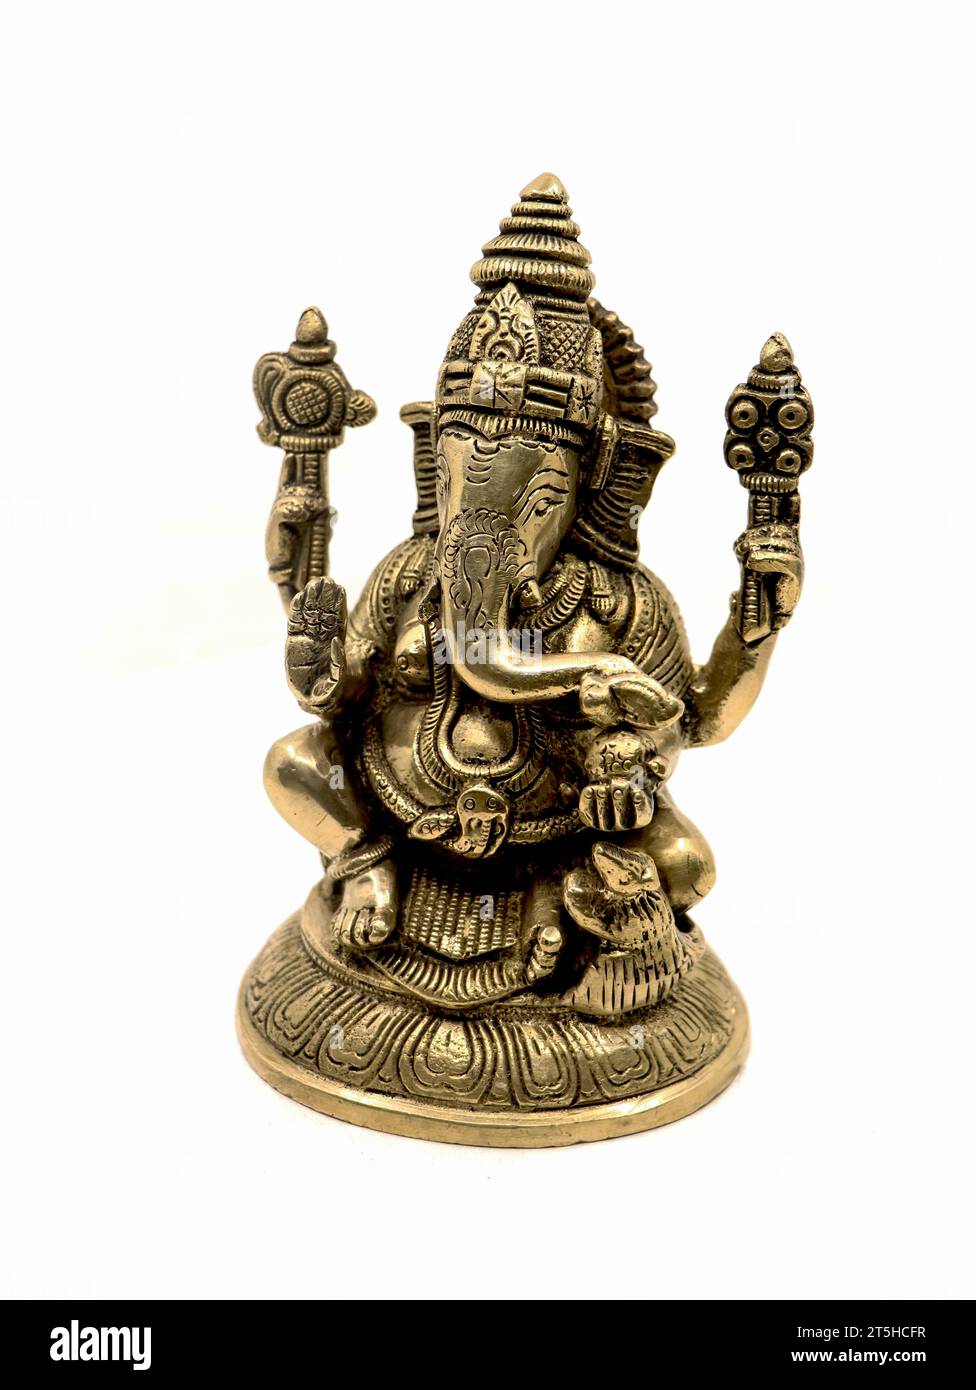 lord ganesh with four hands sitting brass statue with intricate details and decorative carvings isolated in a white background Stock Photo